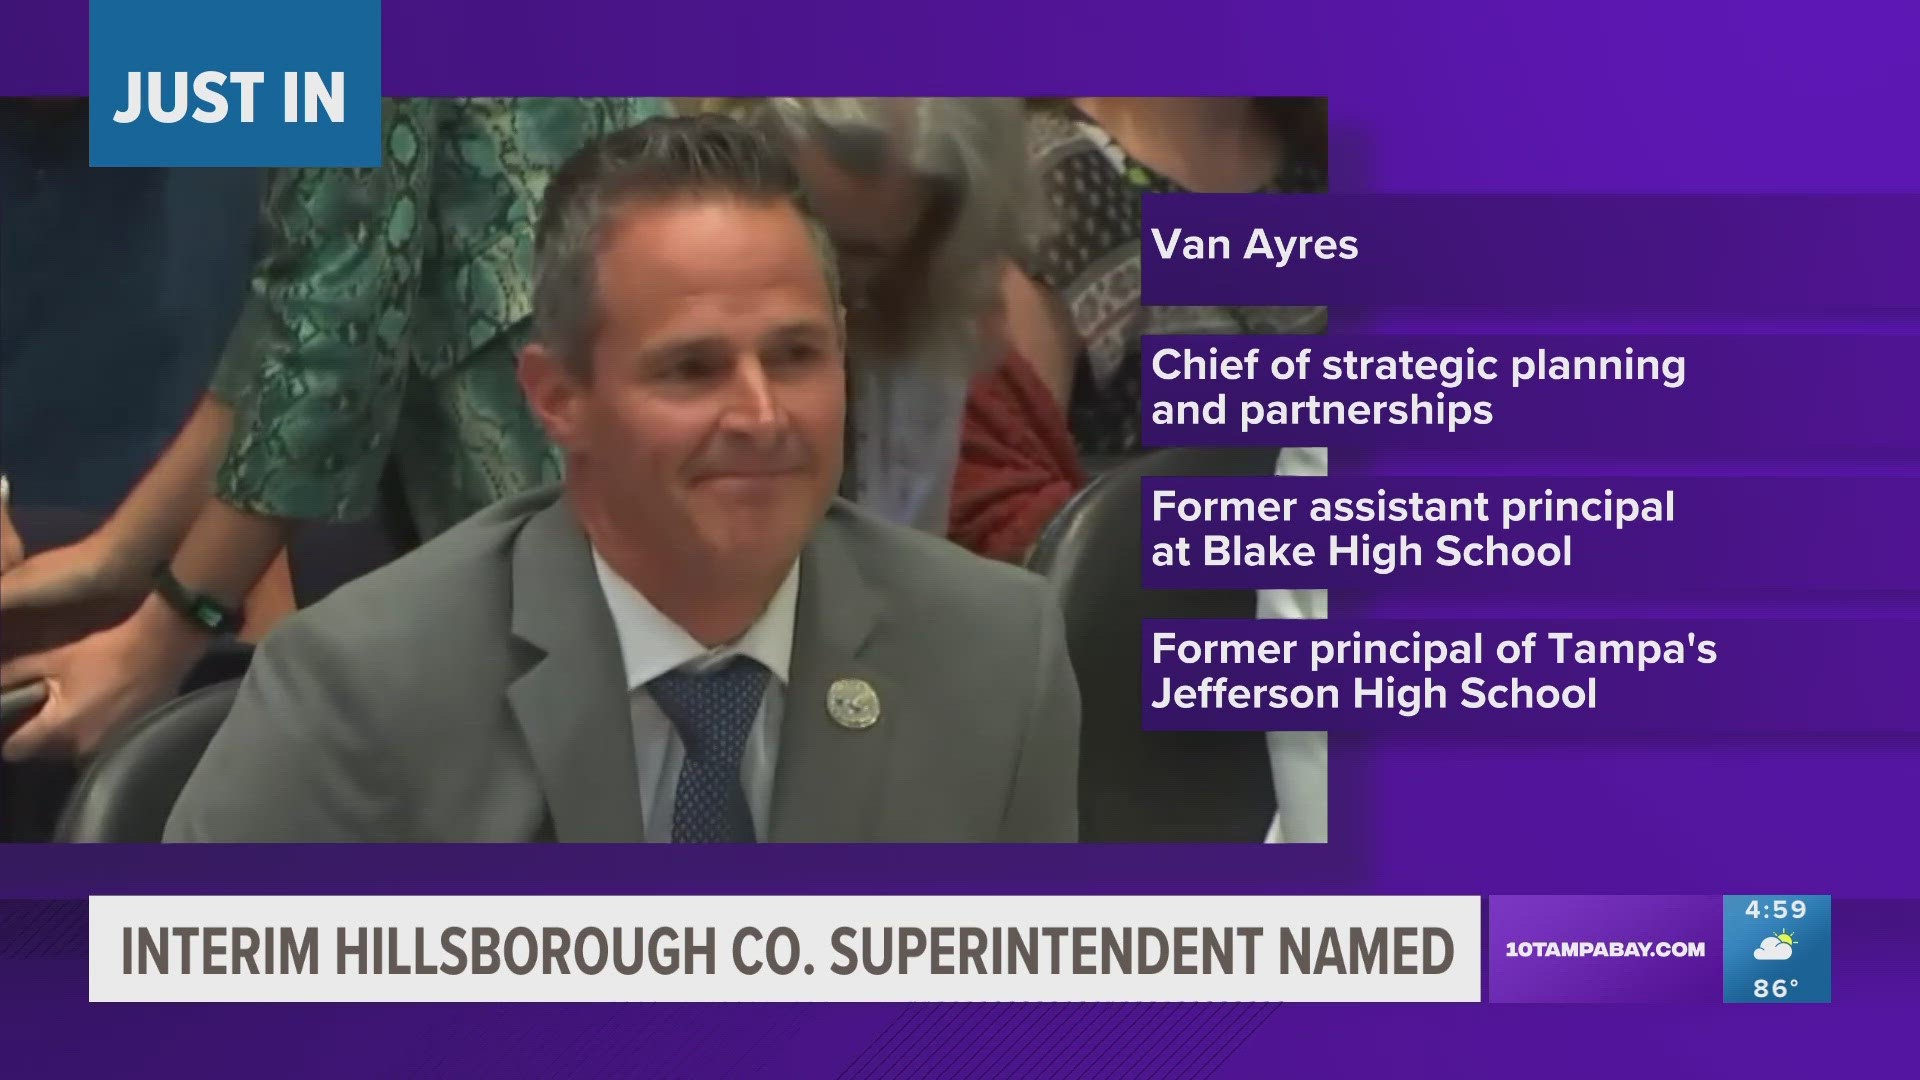 Along with voting for the position to be filled, the school board also officially made the superintendent role a 12-month job instead of just six months.